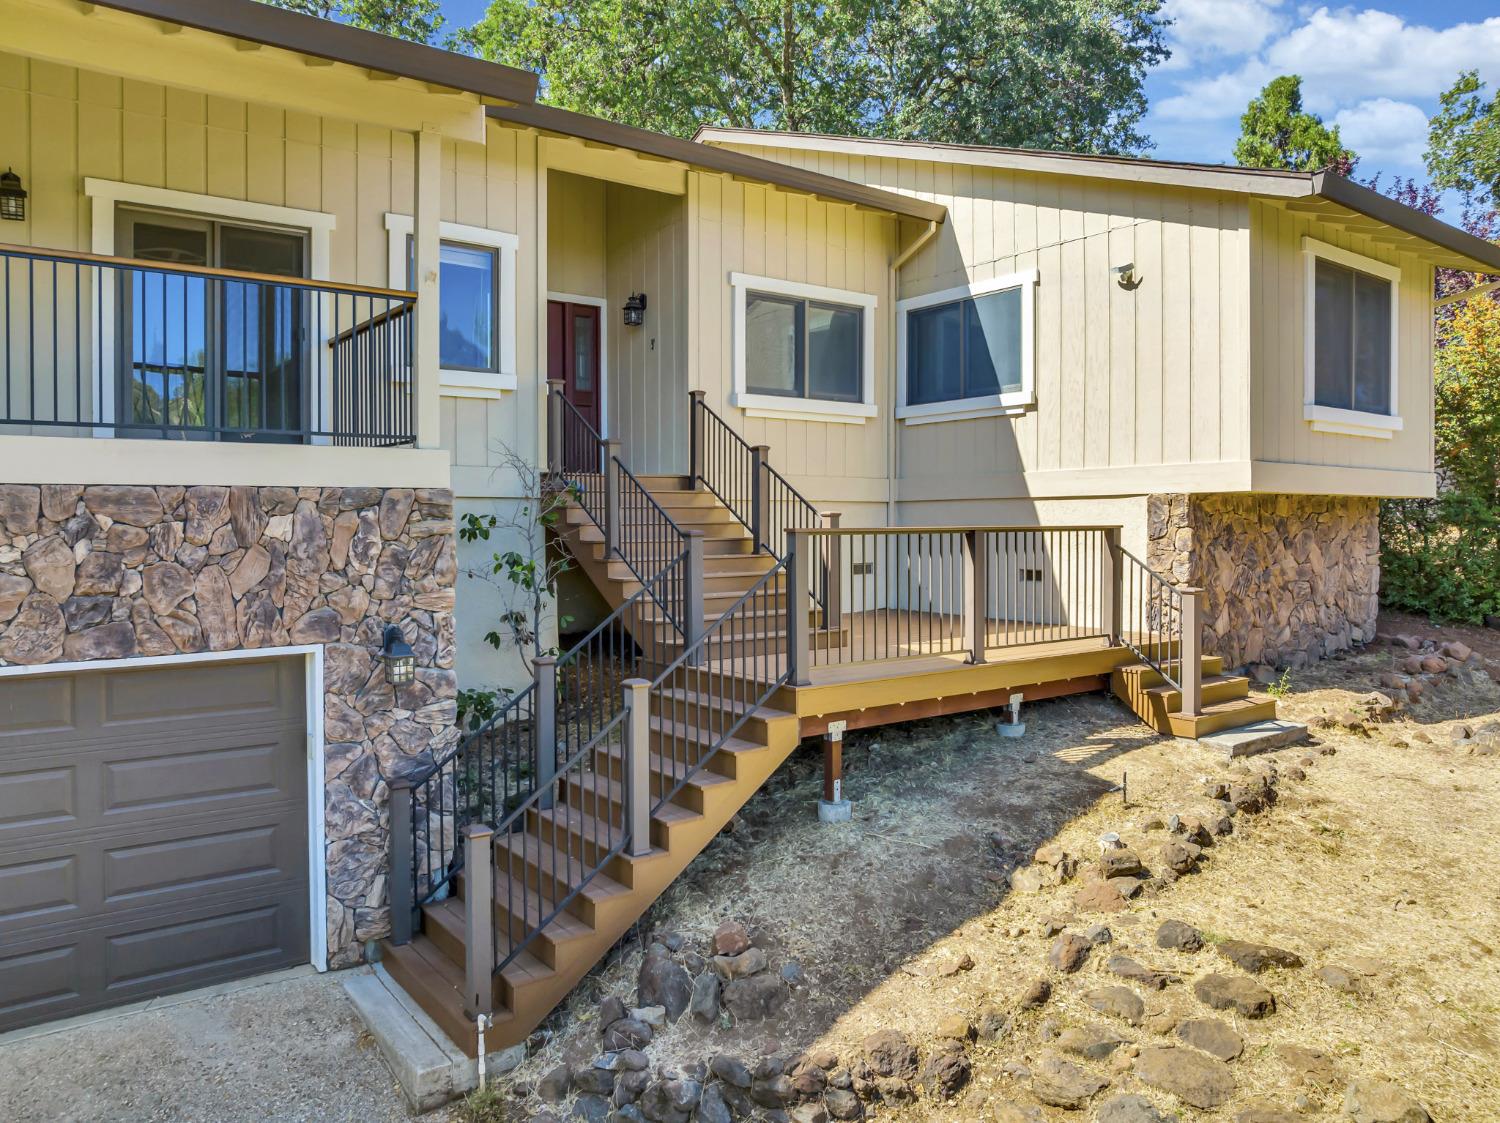 Photo of 3554 Kimberly Rd in Cameron Park, CA